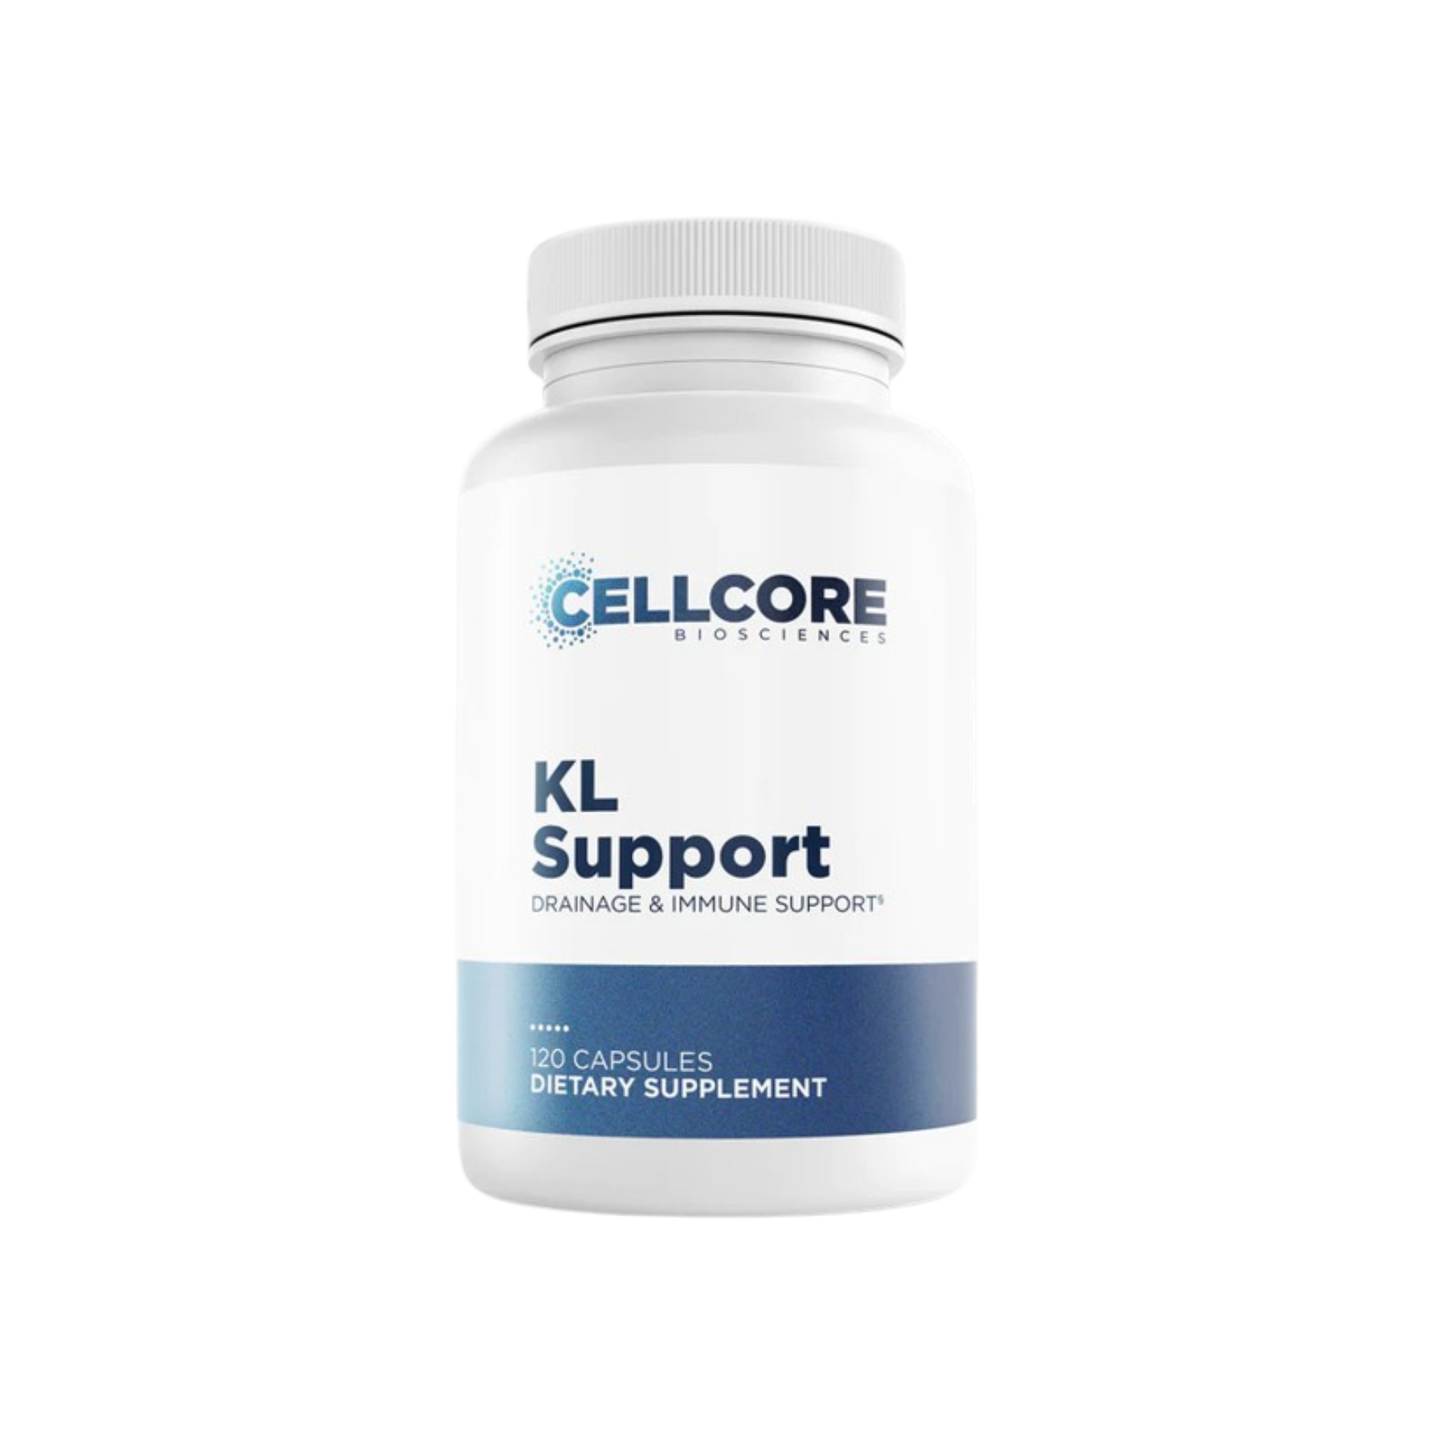 CellCore KL Support Capsules